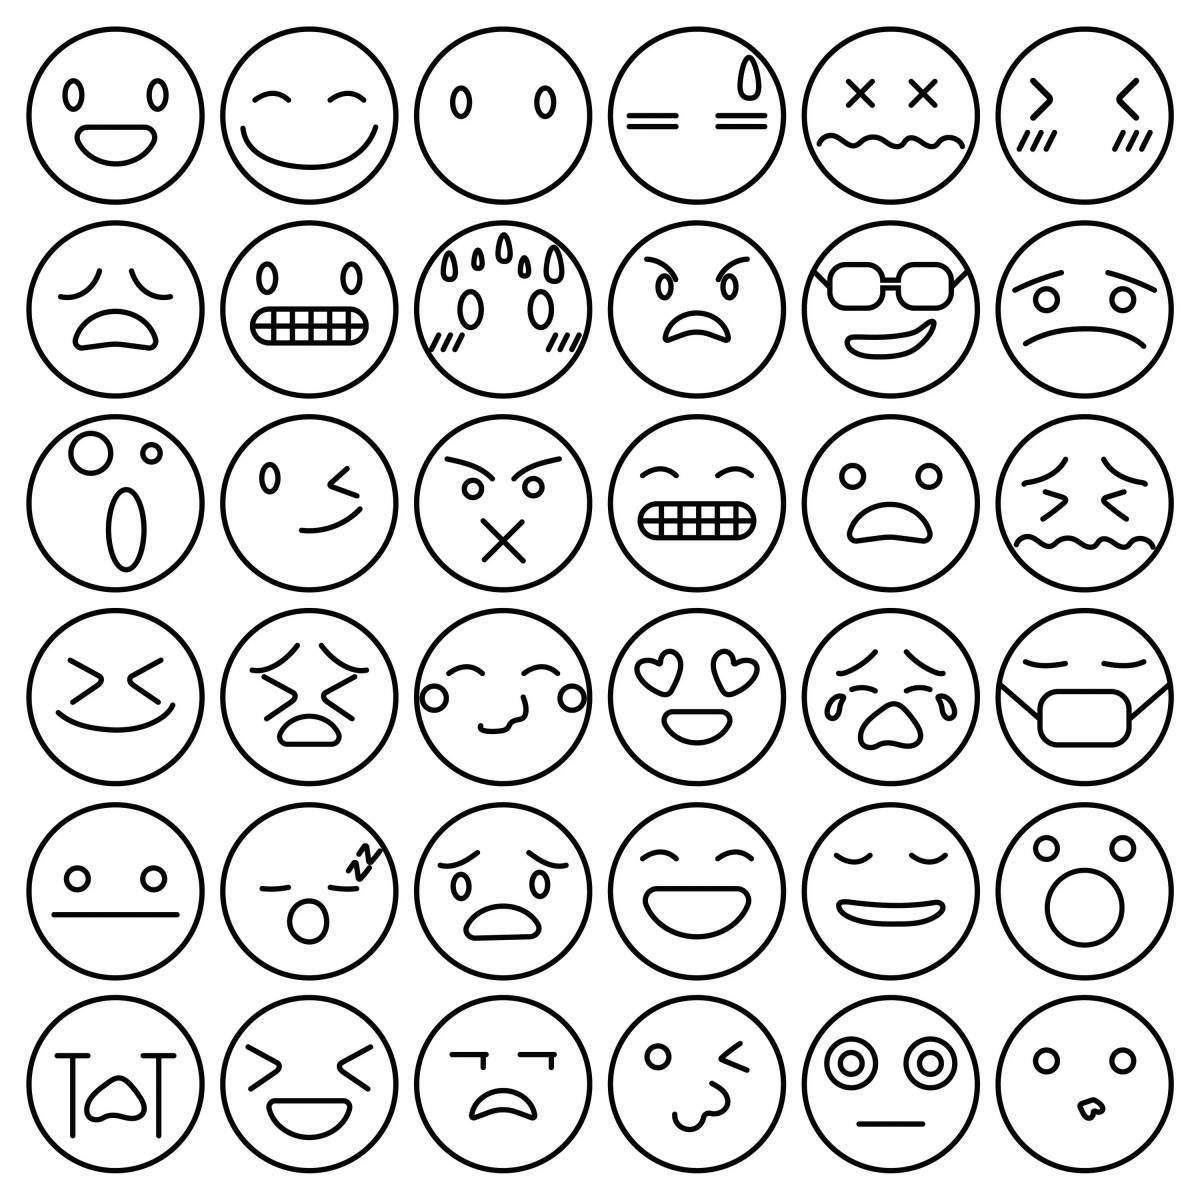 Coloring pages with emoticons, small